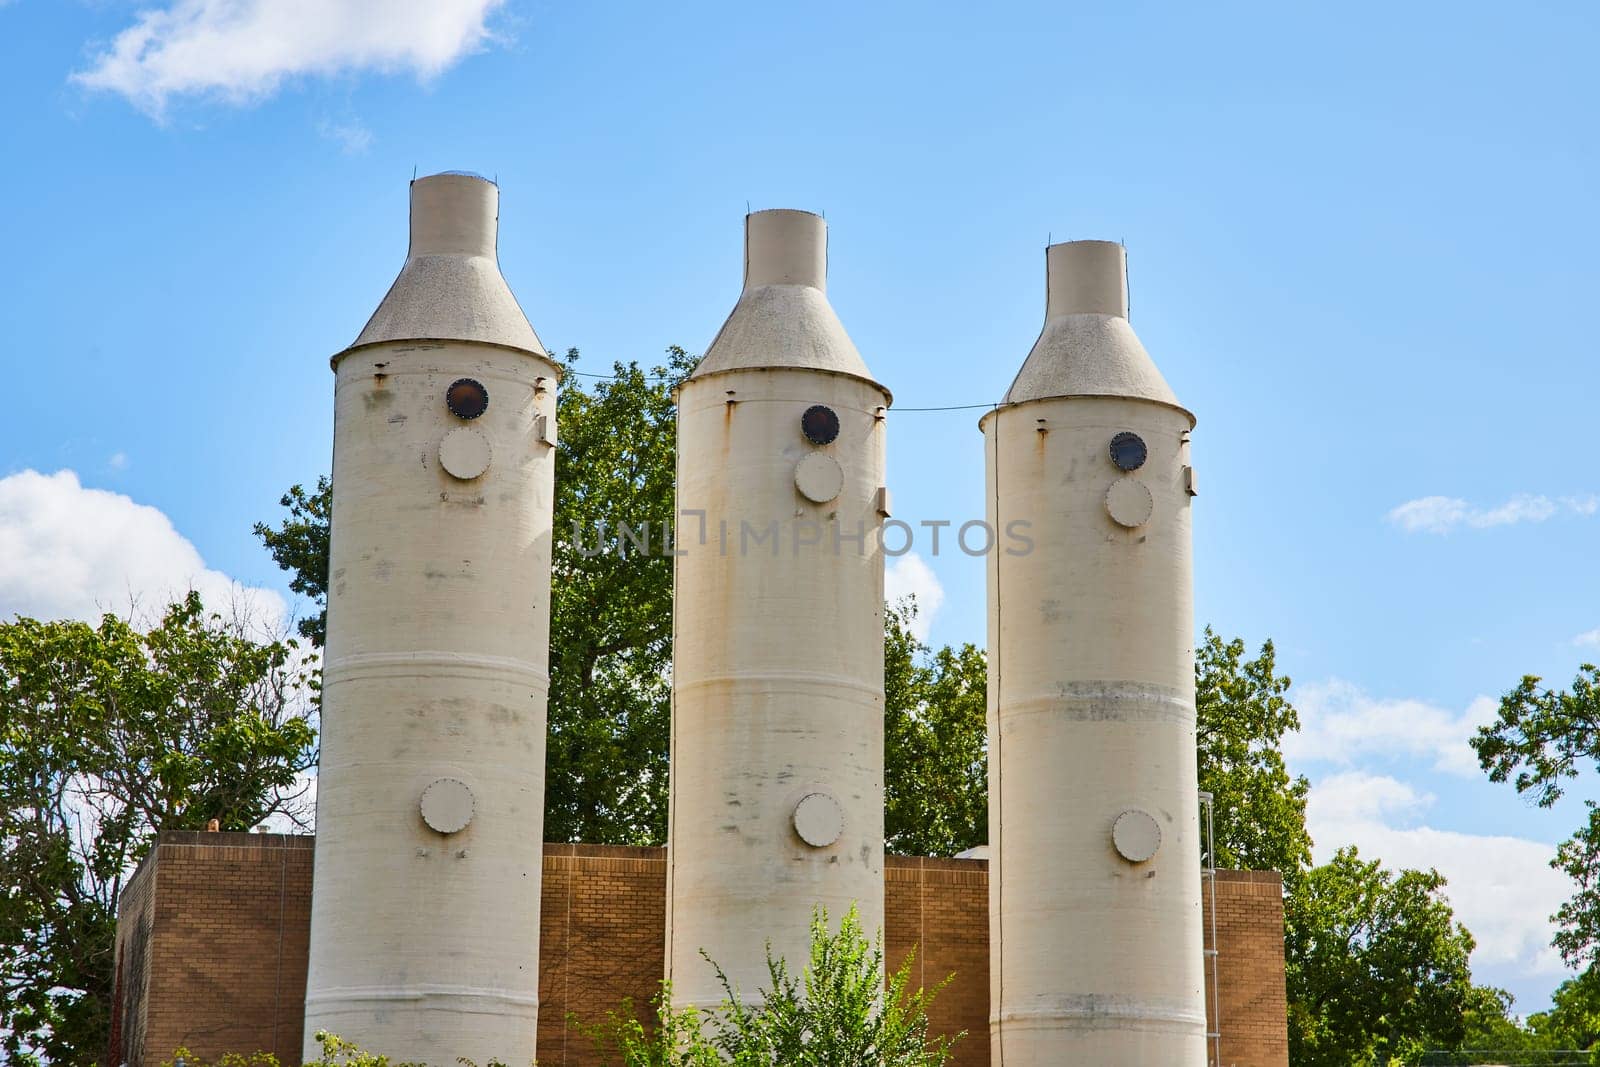 Industrial Silos with Conical Roofs Against Blue Sky, Eye-Level View by njproductions